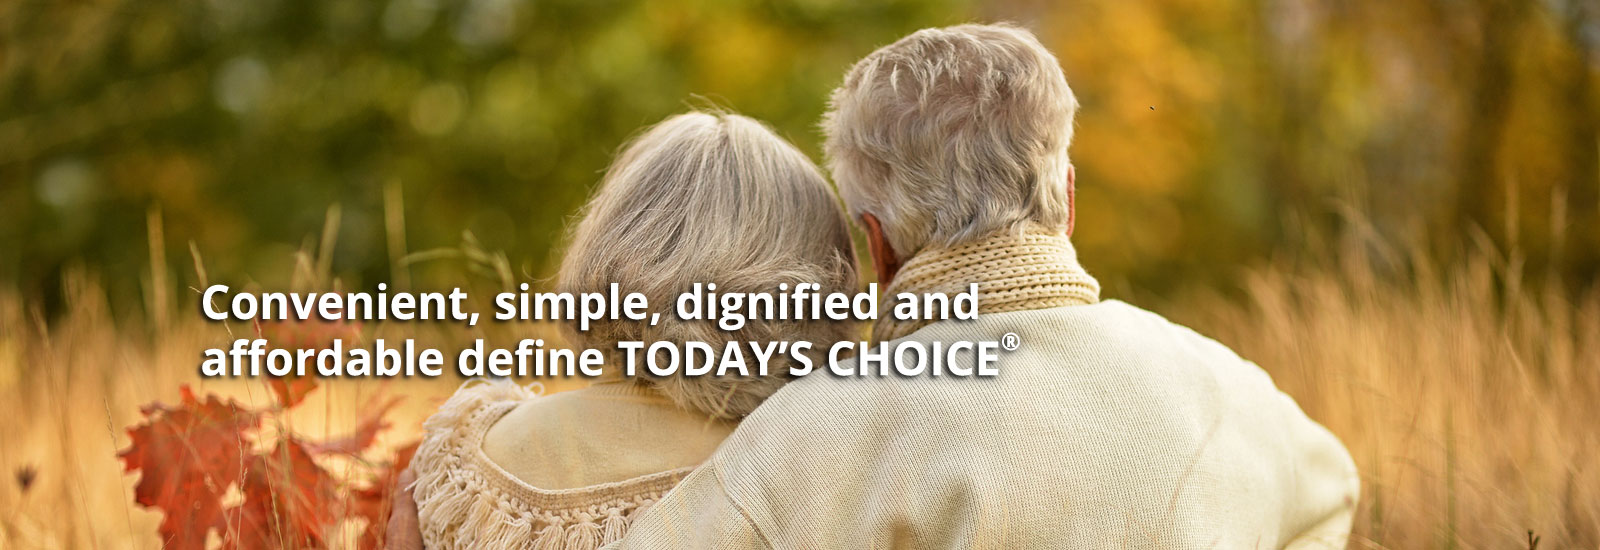 Convenient, simple, dignified and affordable define Today's Choice